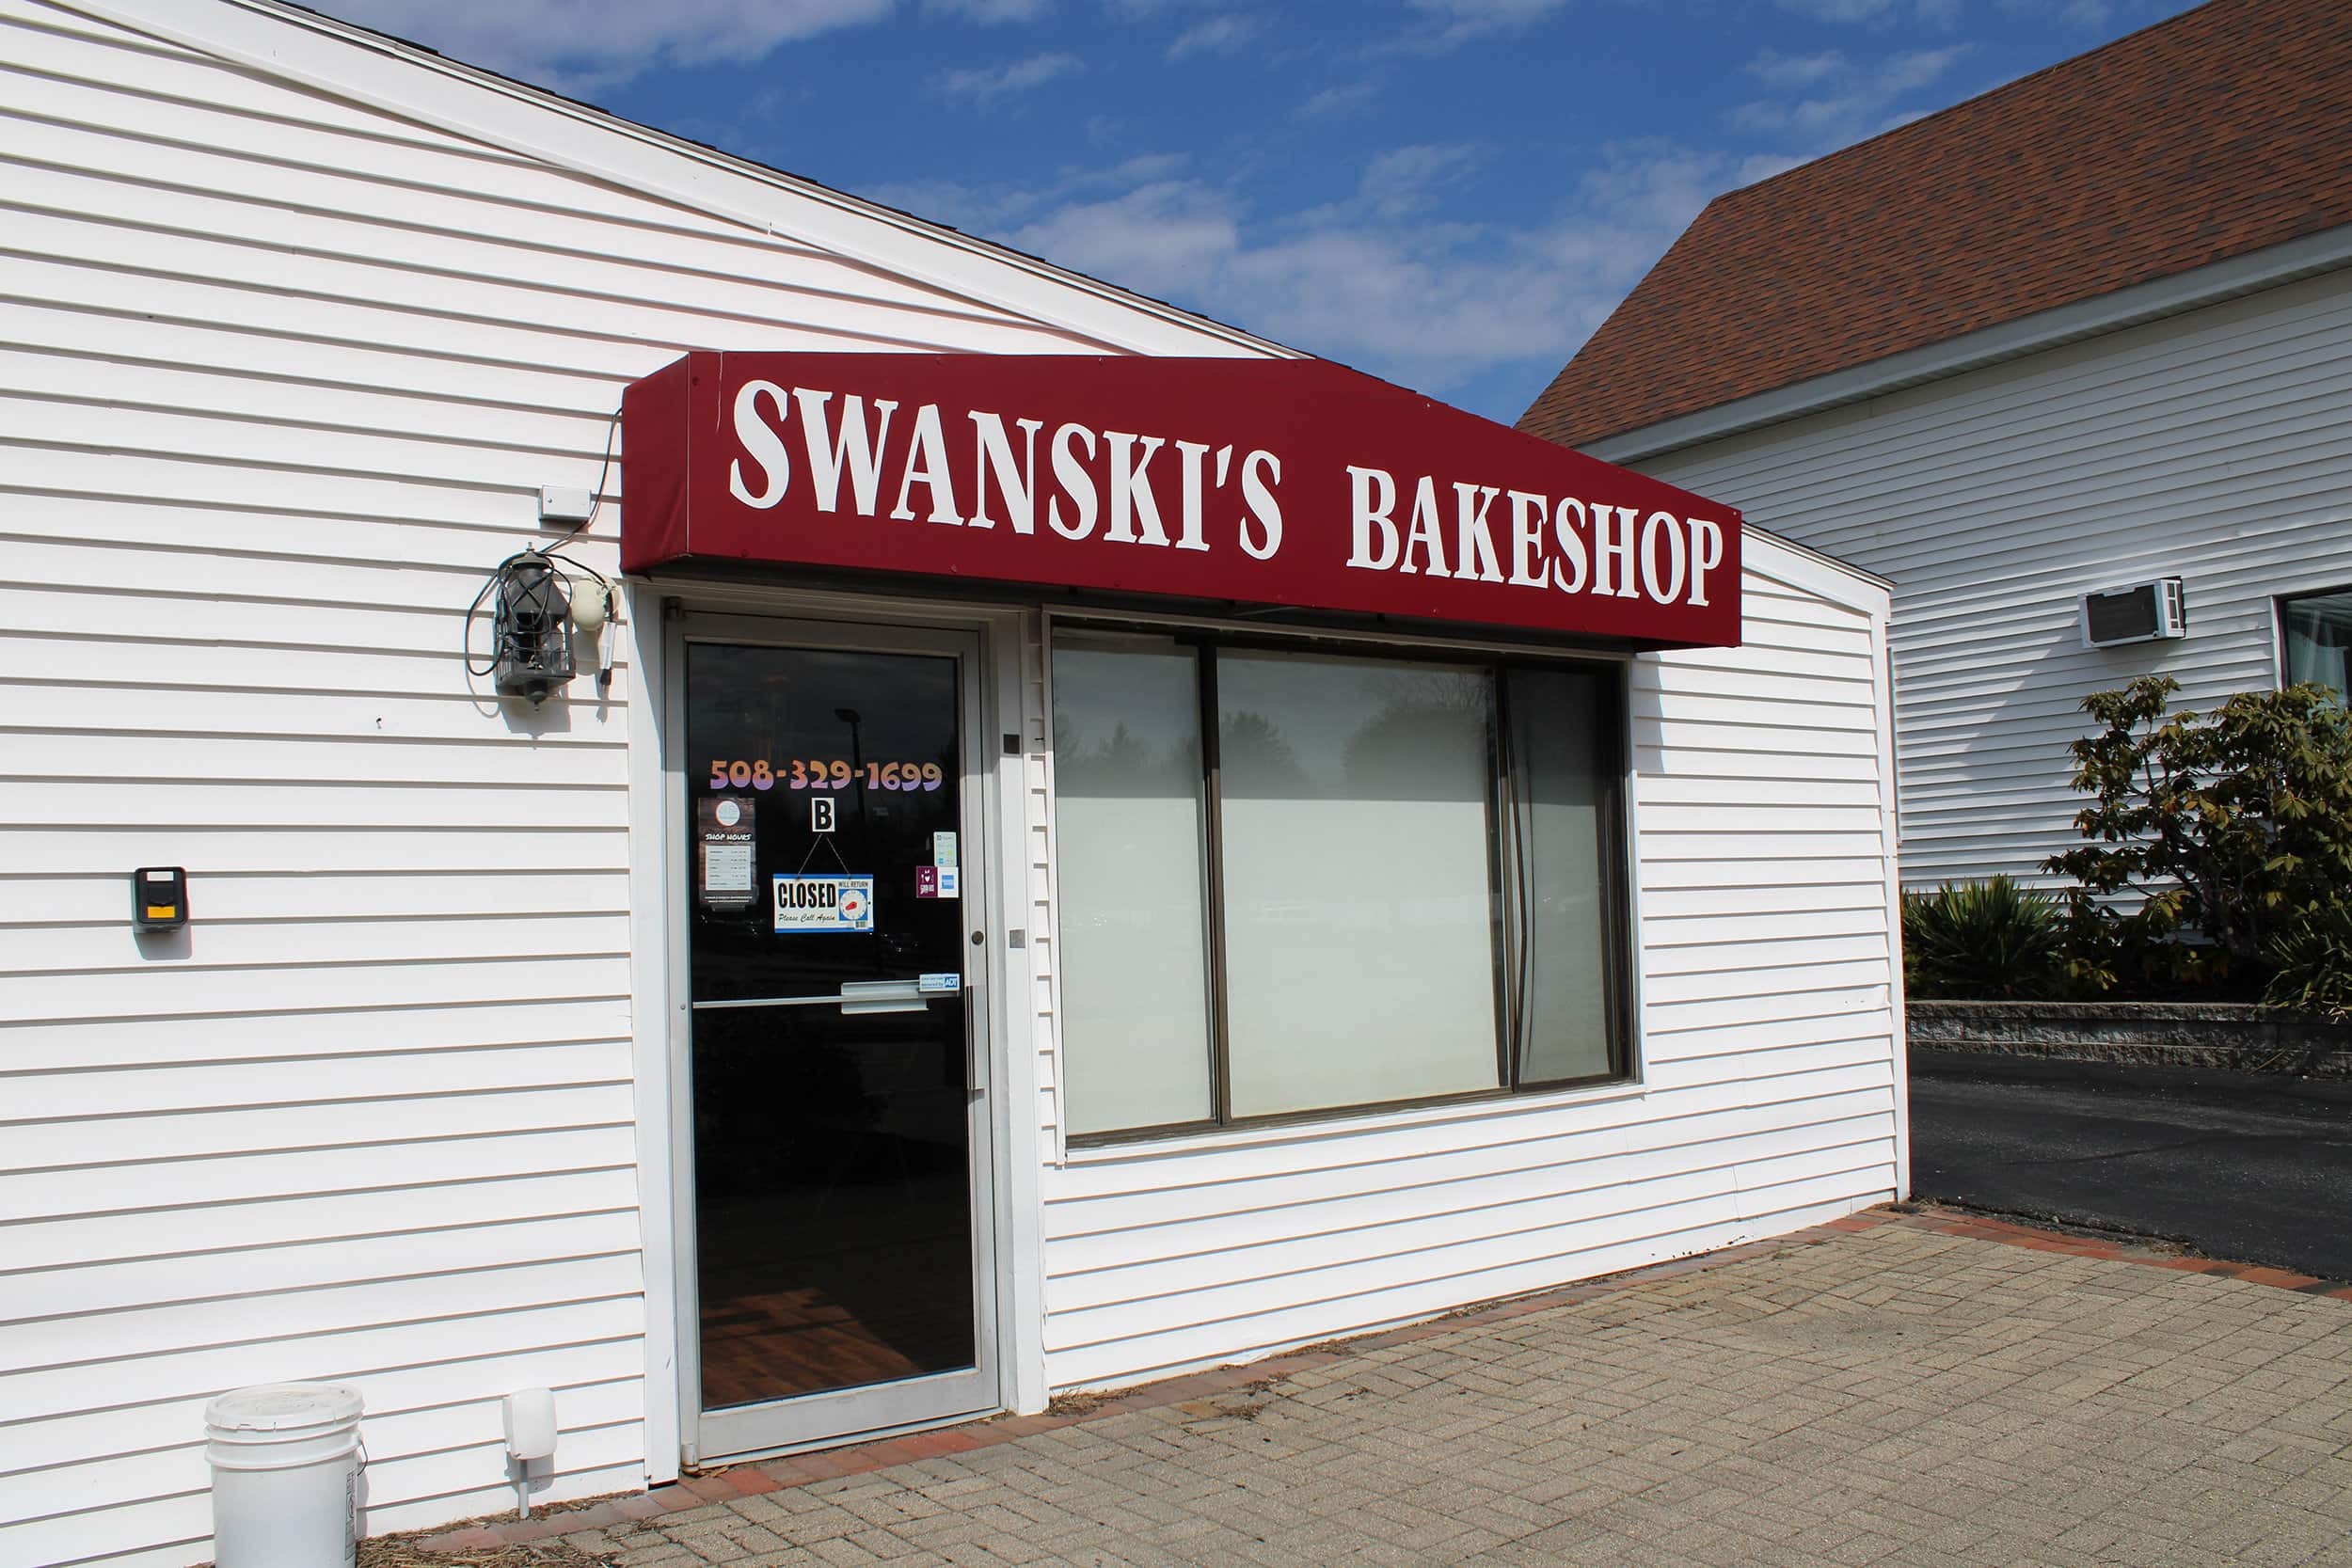 After closing, Swanski’s opens online store